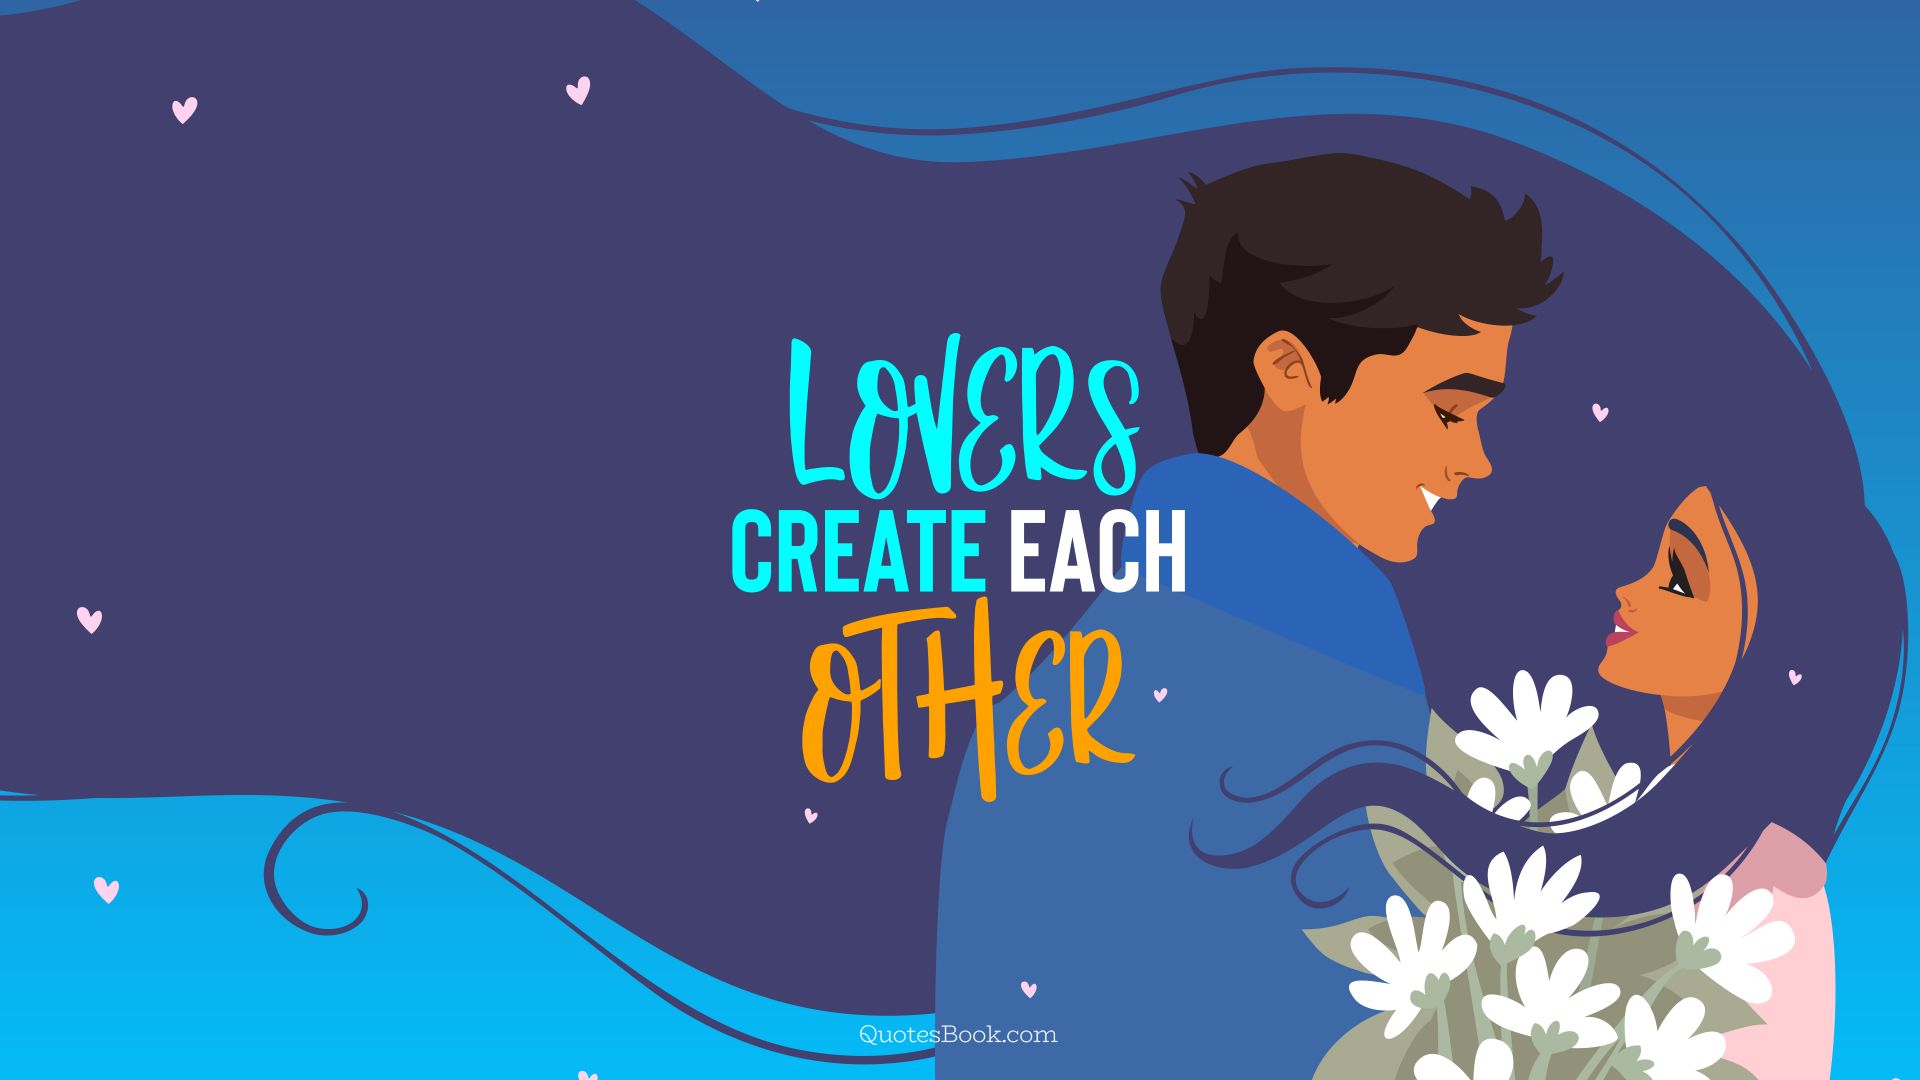 Lovers create each other. - Quote by QuotesBook